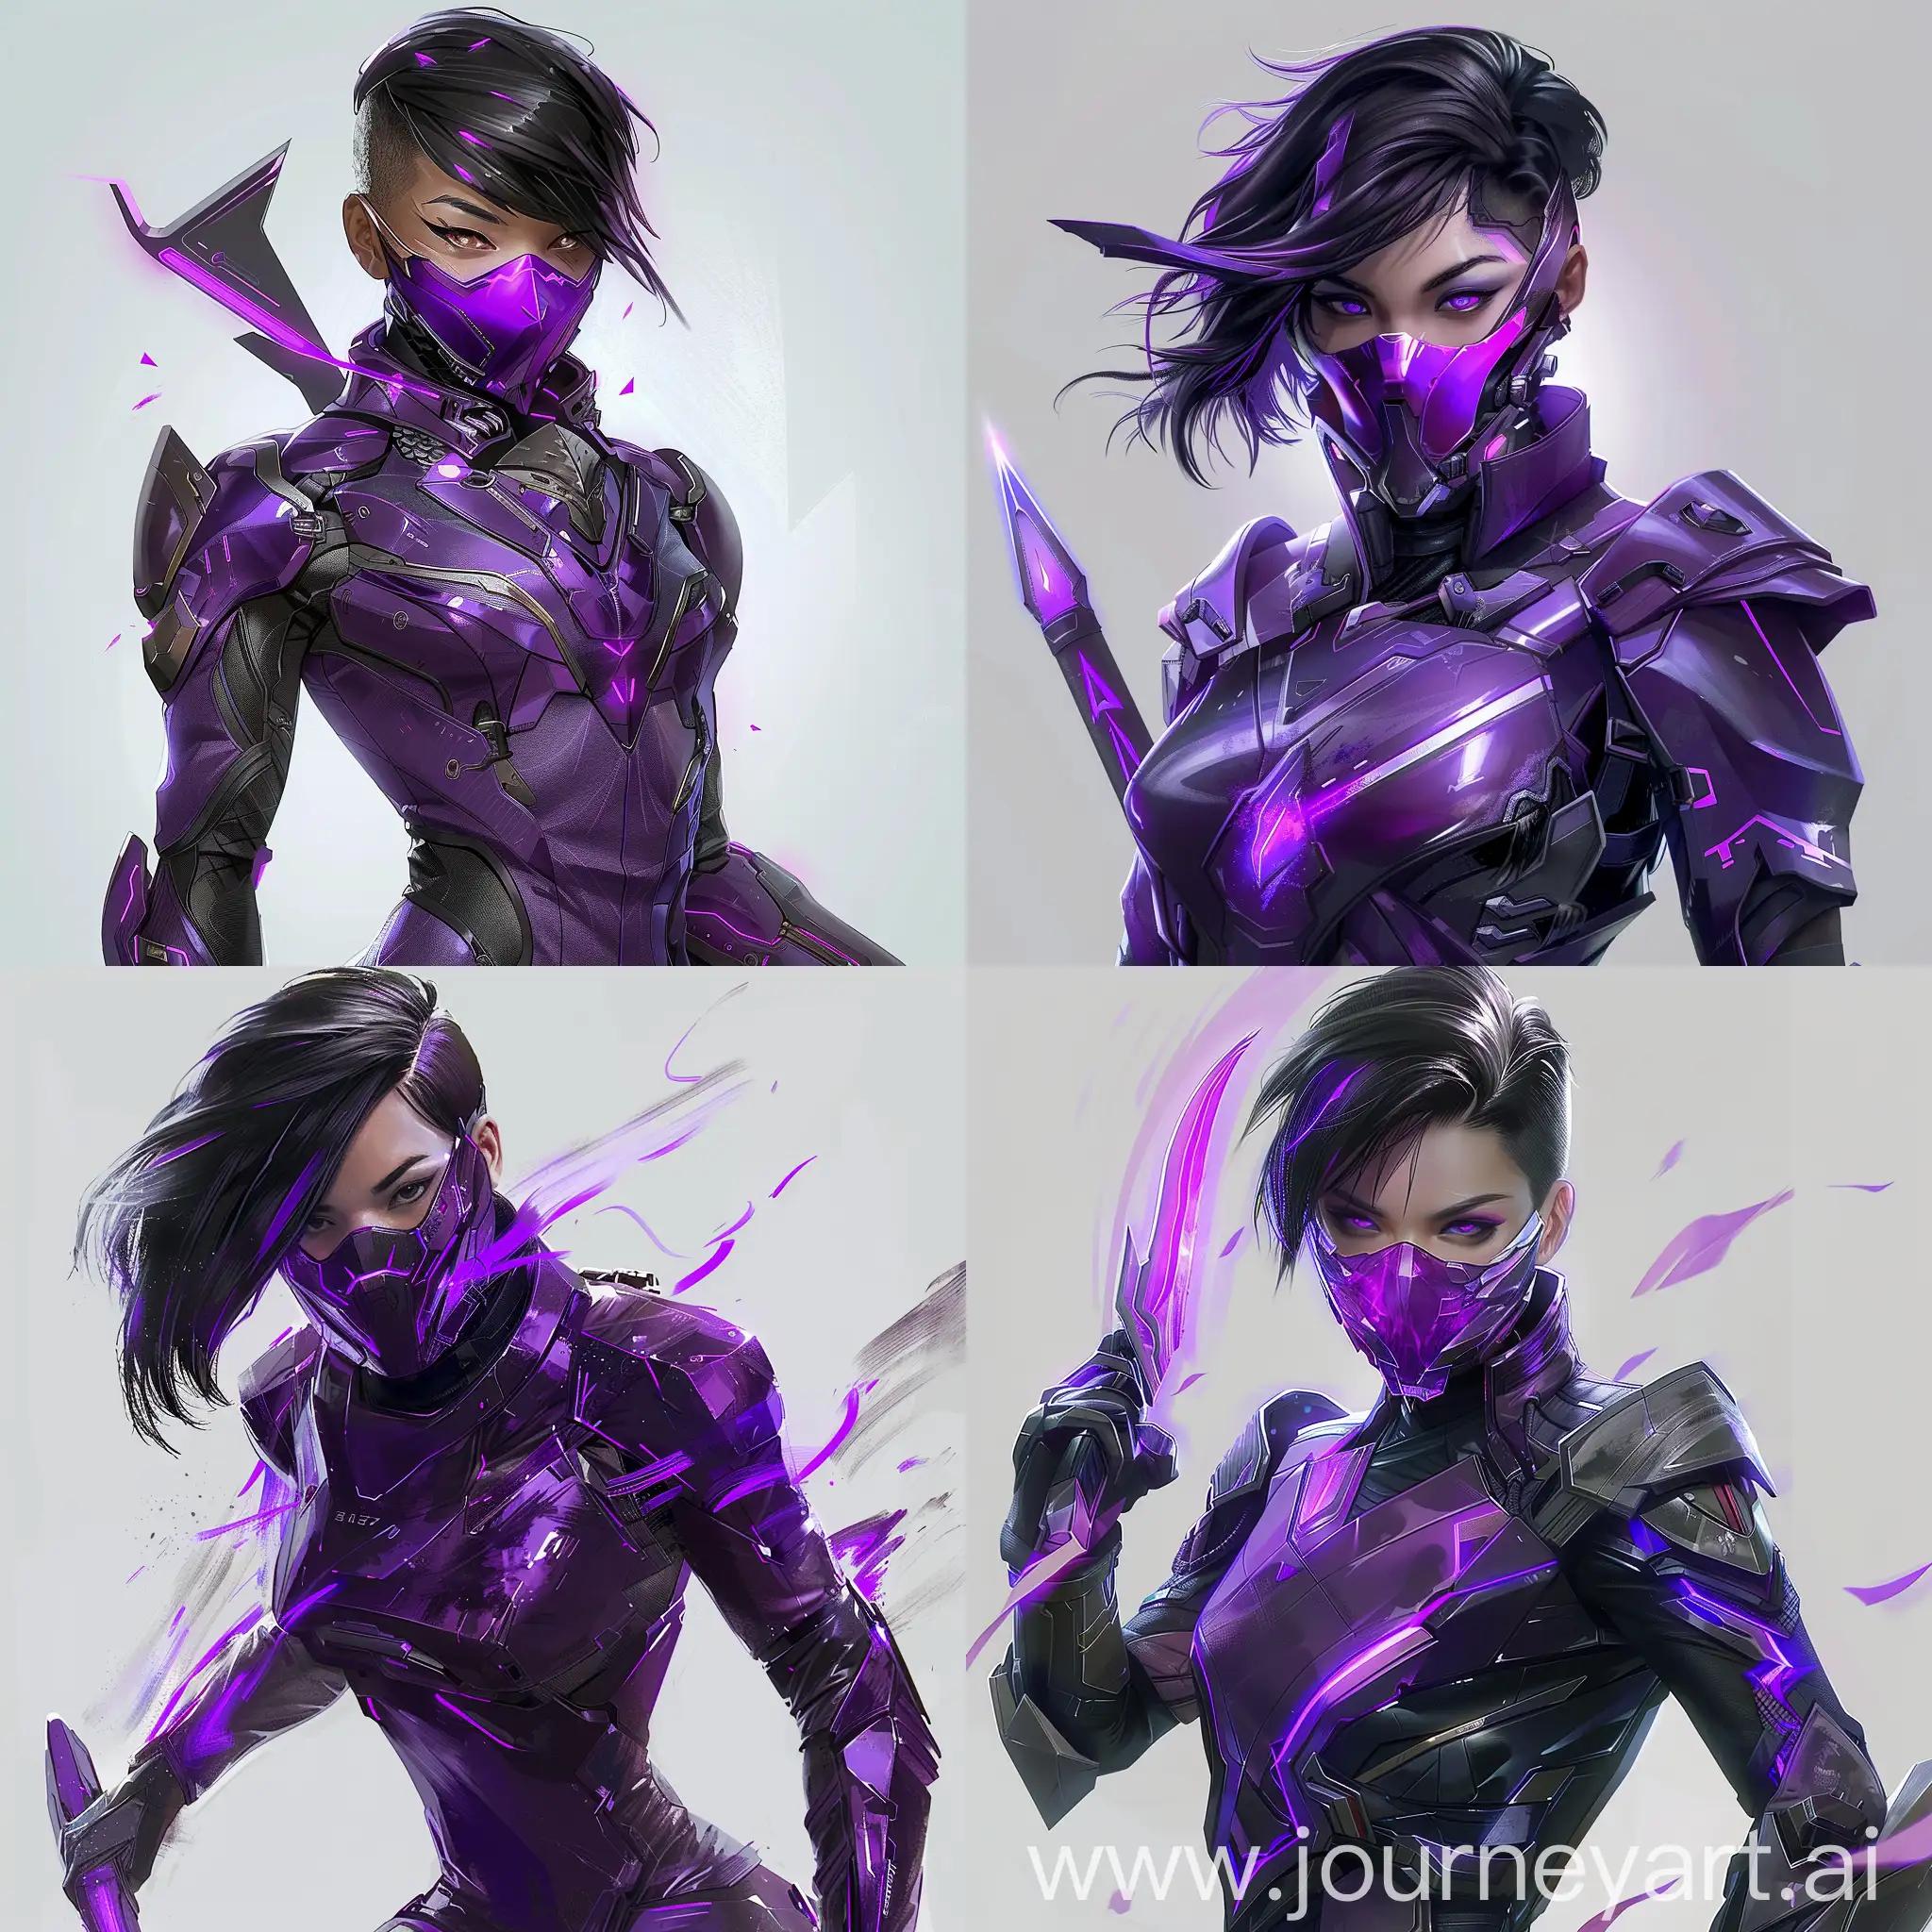 A female warrior with short and black hair wearing a sleek and futuristic purple armor suit, wielding a razor-sharp energy blade, with glowing purple accents, a dynamic pose, and a full-face mask that covers her entire face. Her hair has a purple gradient and is slightly longer than before.